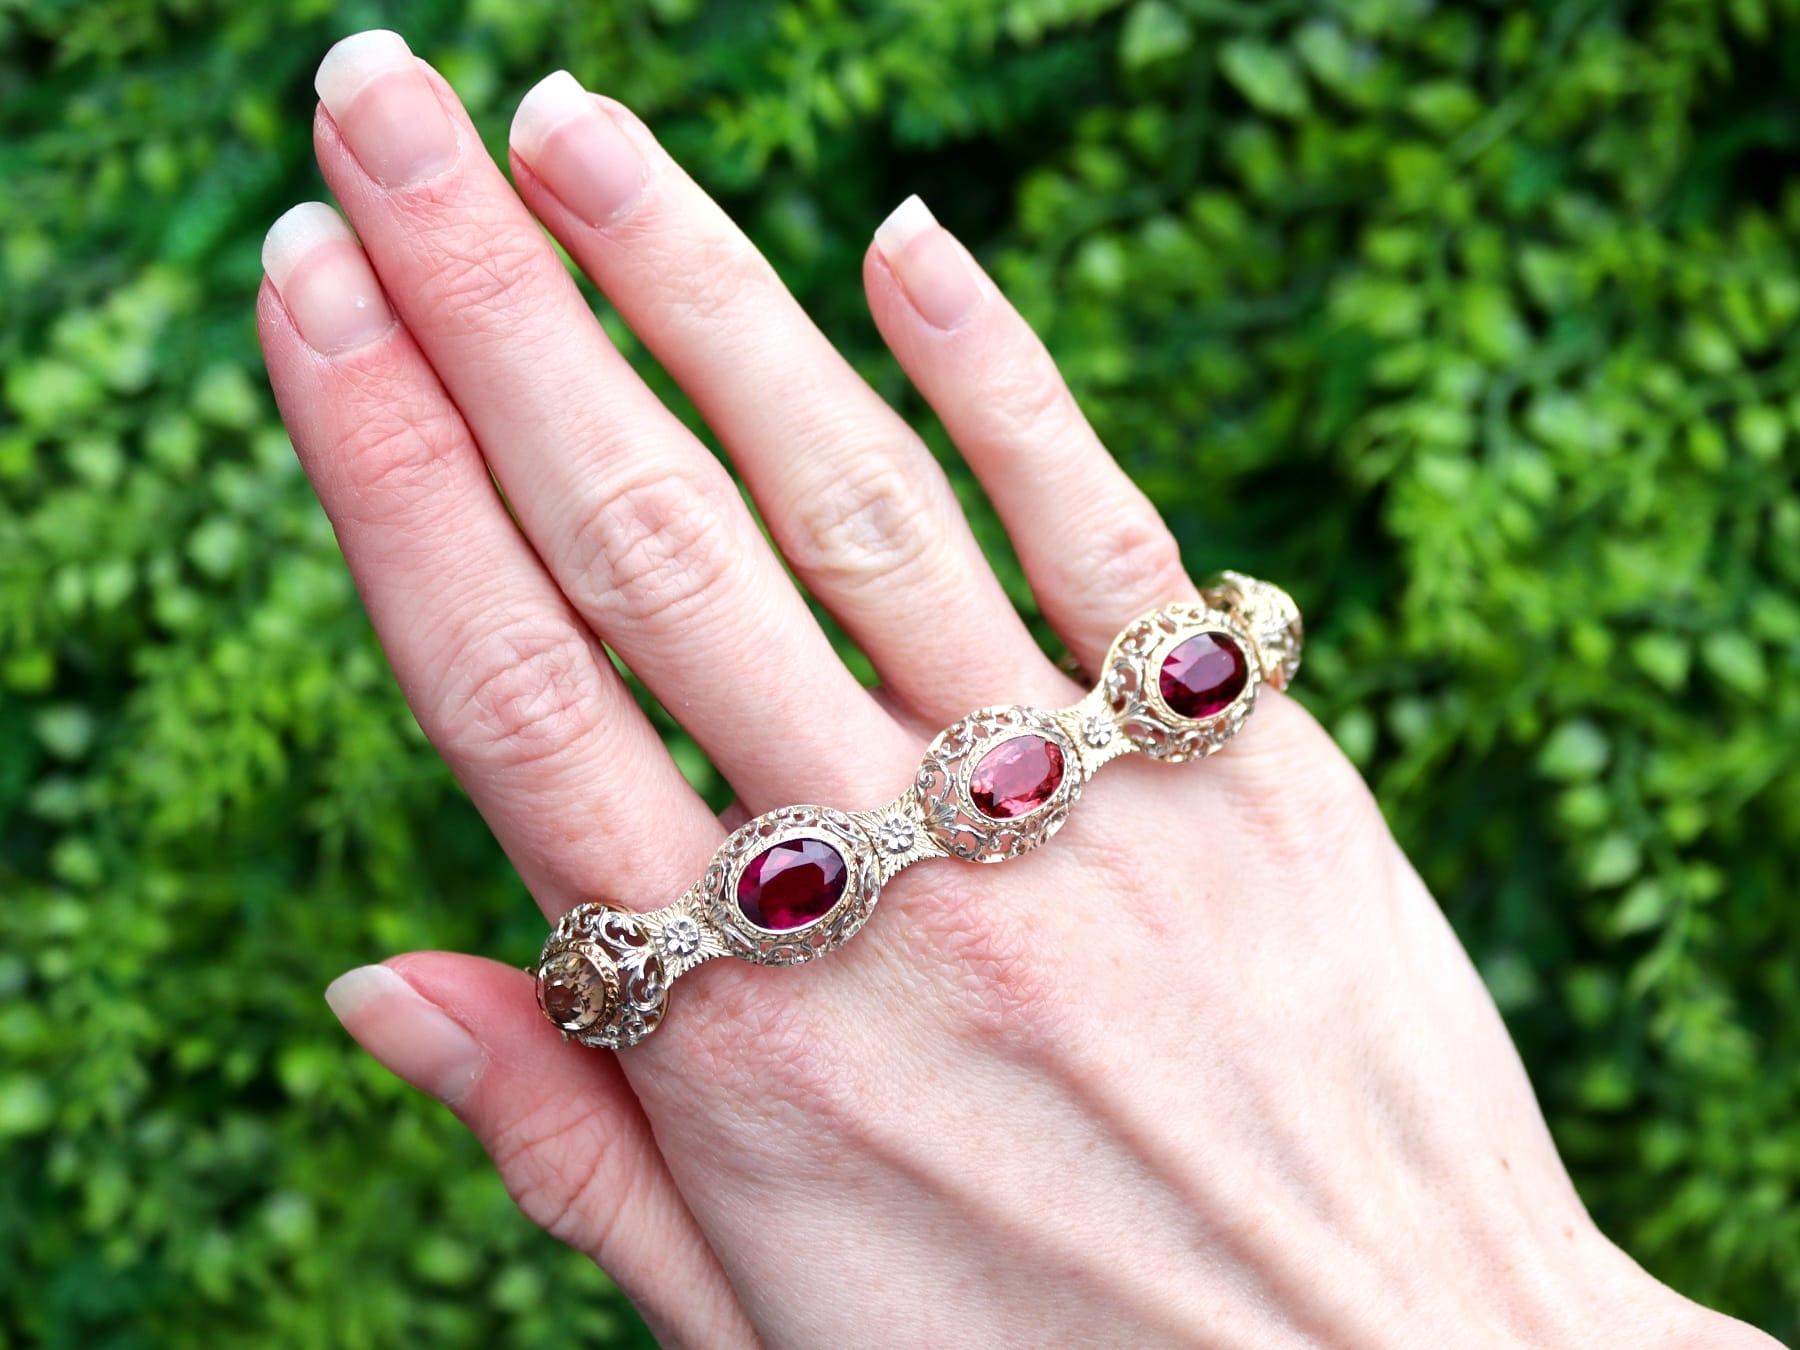 A stunning, fine and impressive antique 22.82 carat garnet and 1.95 carat citrine, 10 karat yellow gold and silver bracelet; part of our diverse antique gemstone bracelet collections

This fine and impressive antique bracelet has been crafted in 10k